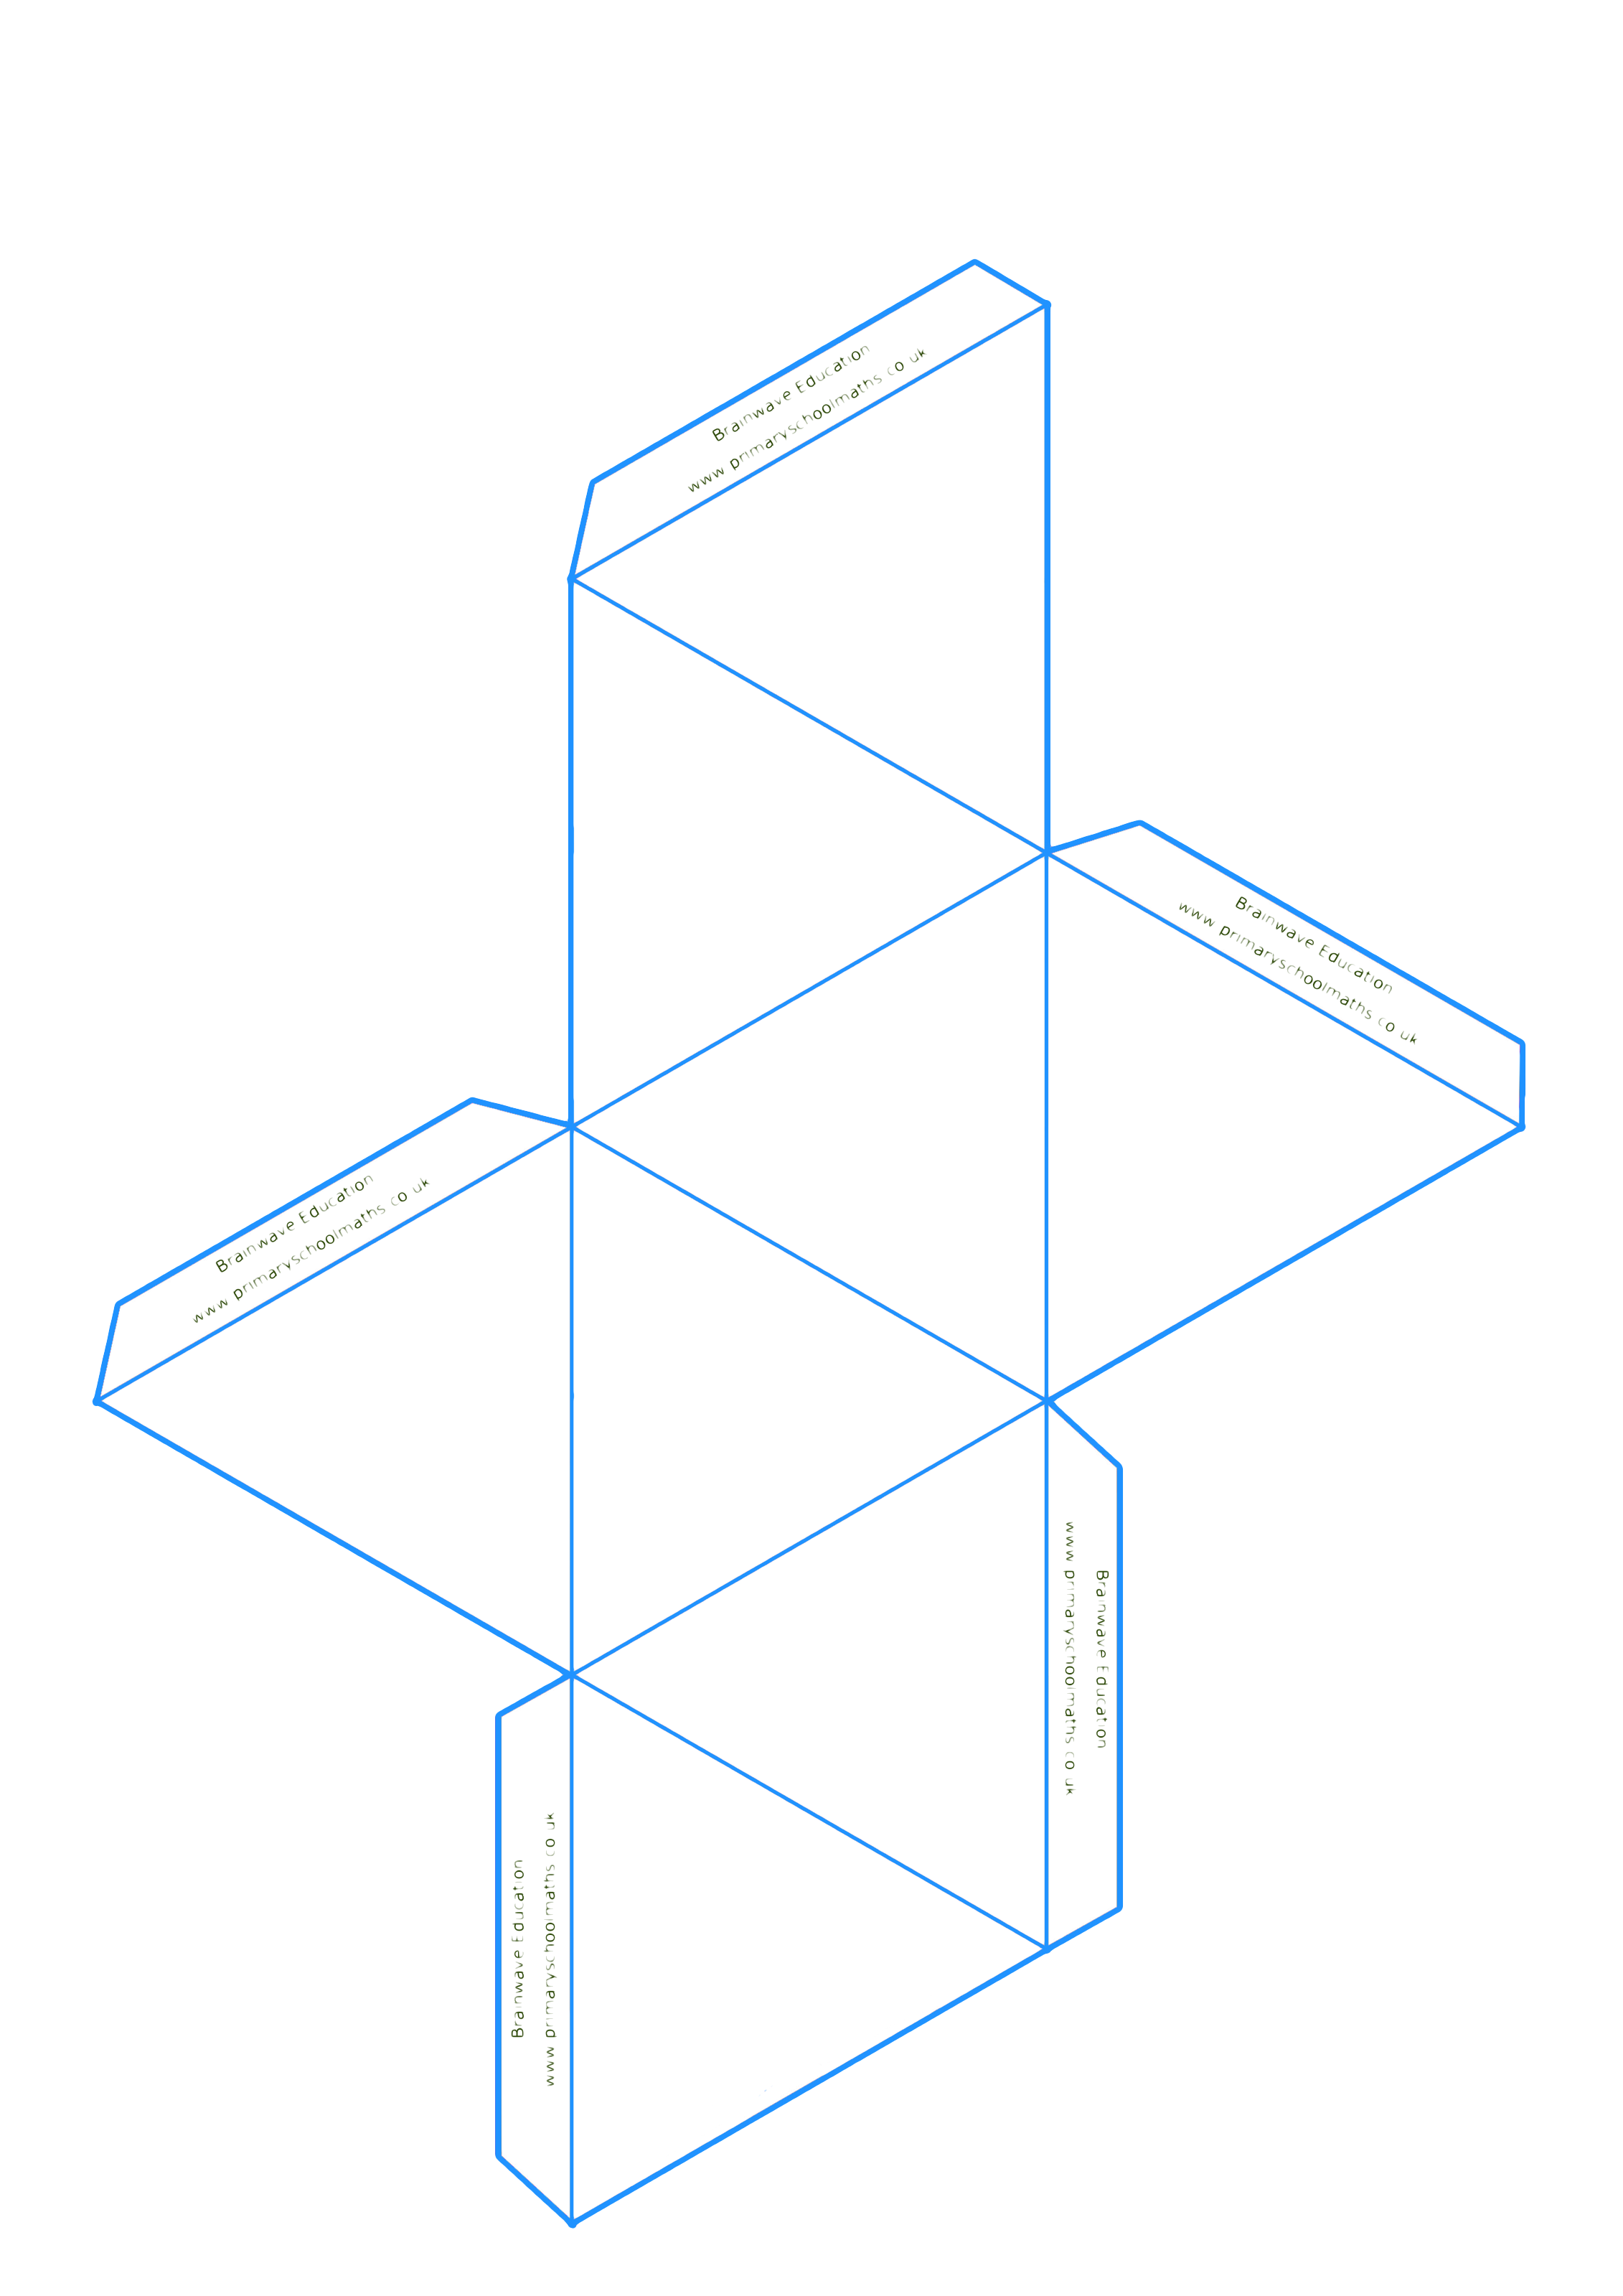 Net for an octahedron